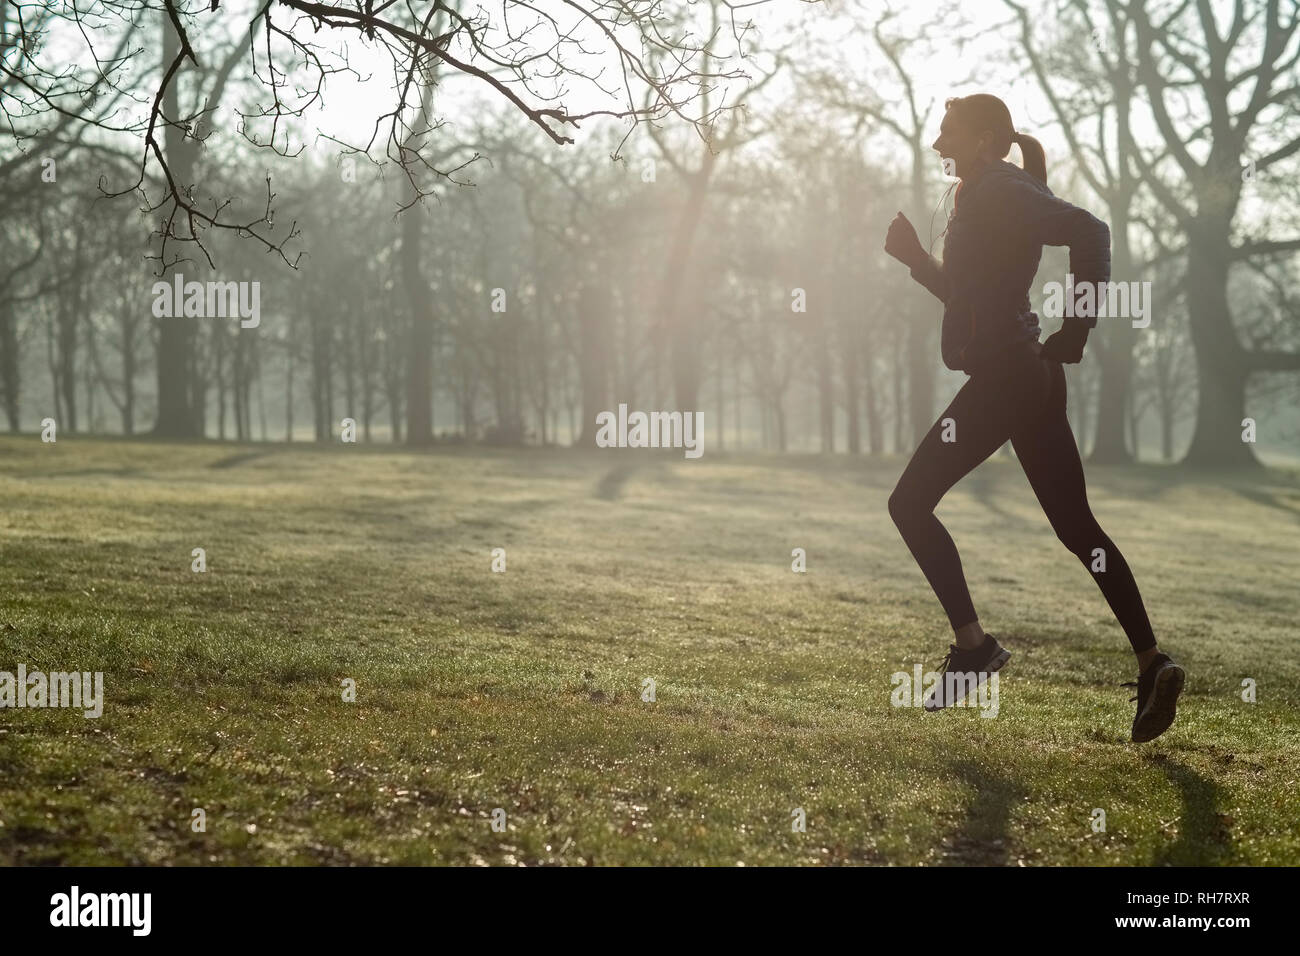 Woman On Early Morning Winter Run In Park Keeping Fit Listening To Music Through Earphones Stock Photo